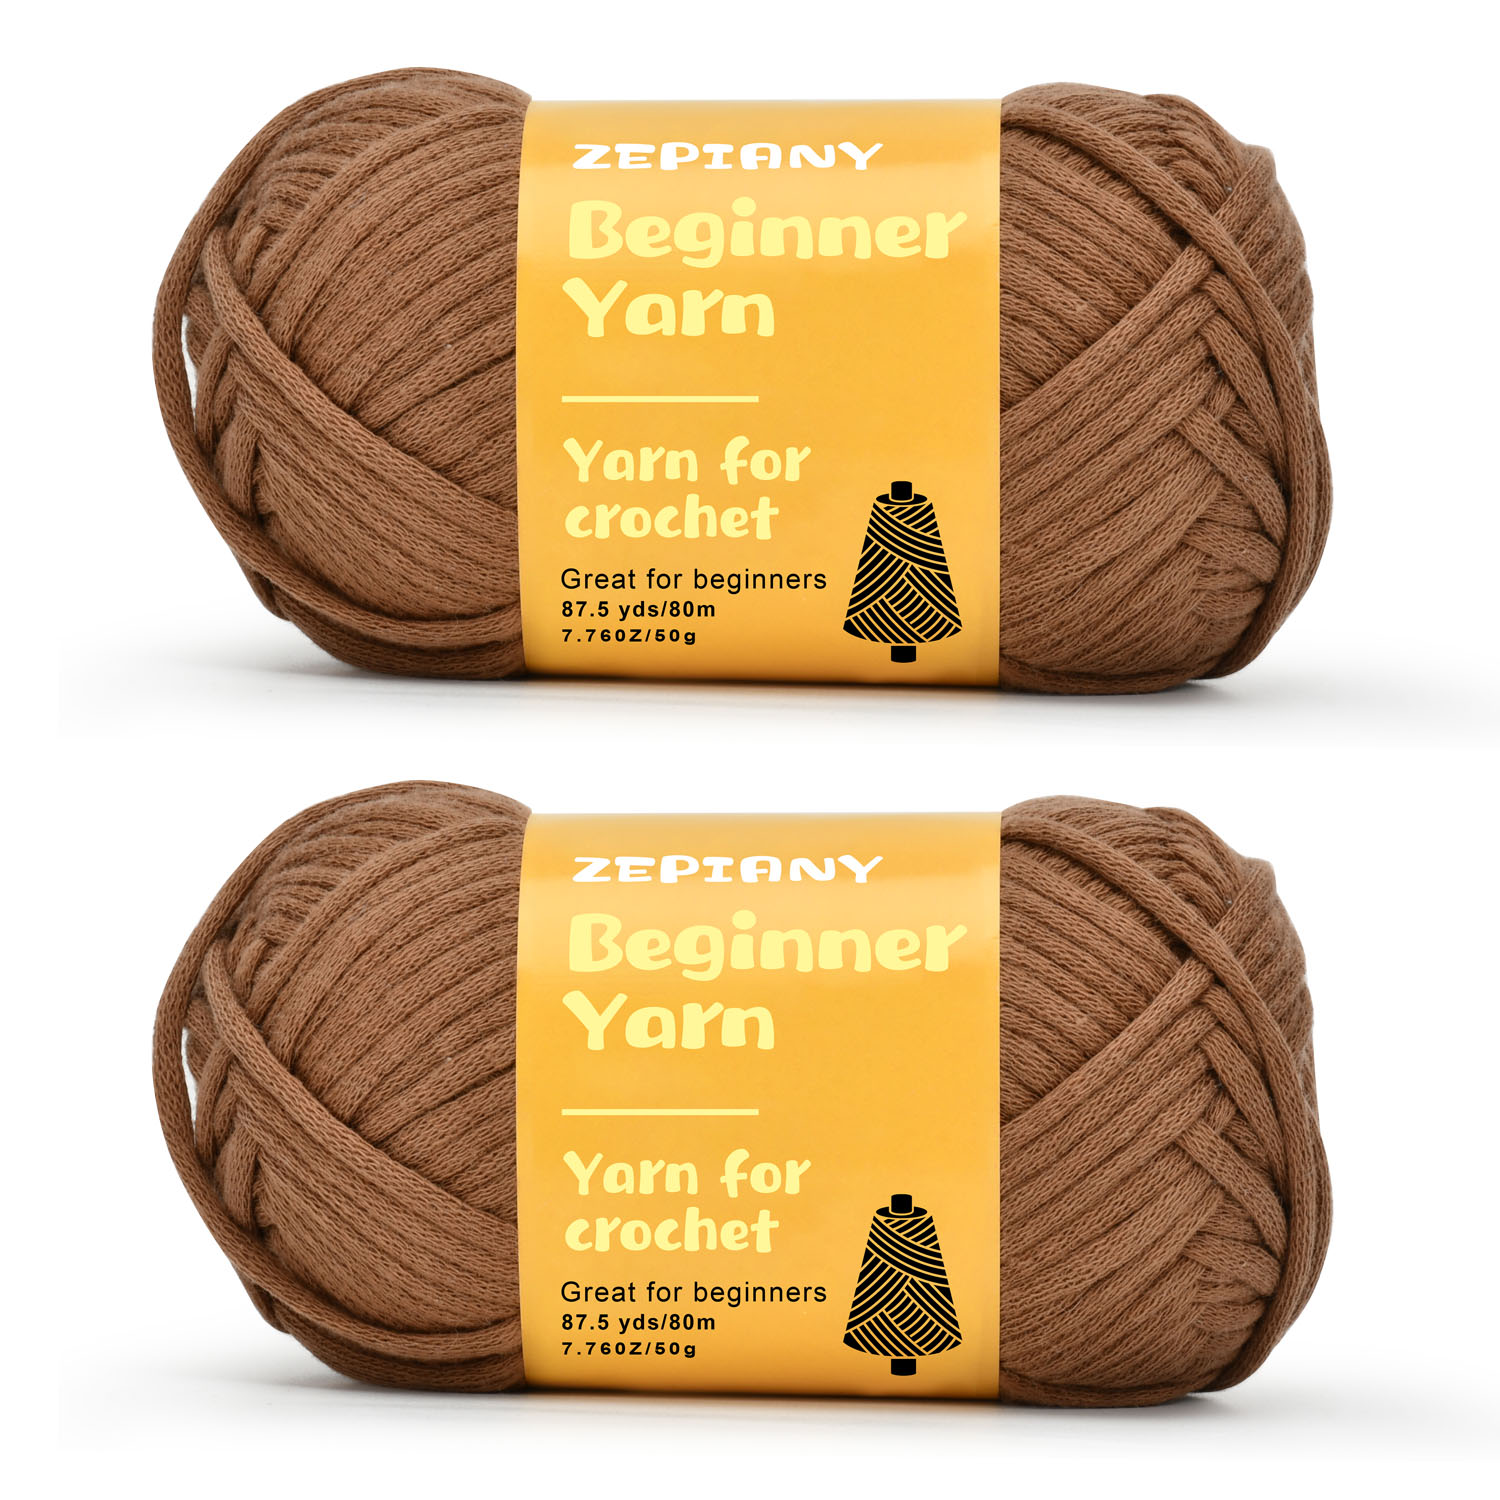 Pllieay Brown Cotton Yarn, 4x50g Crochet Yarn for Crocheting and Knitting,  Cotton Yarn for Beginners with Easy to See Stitches for Beginners